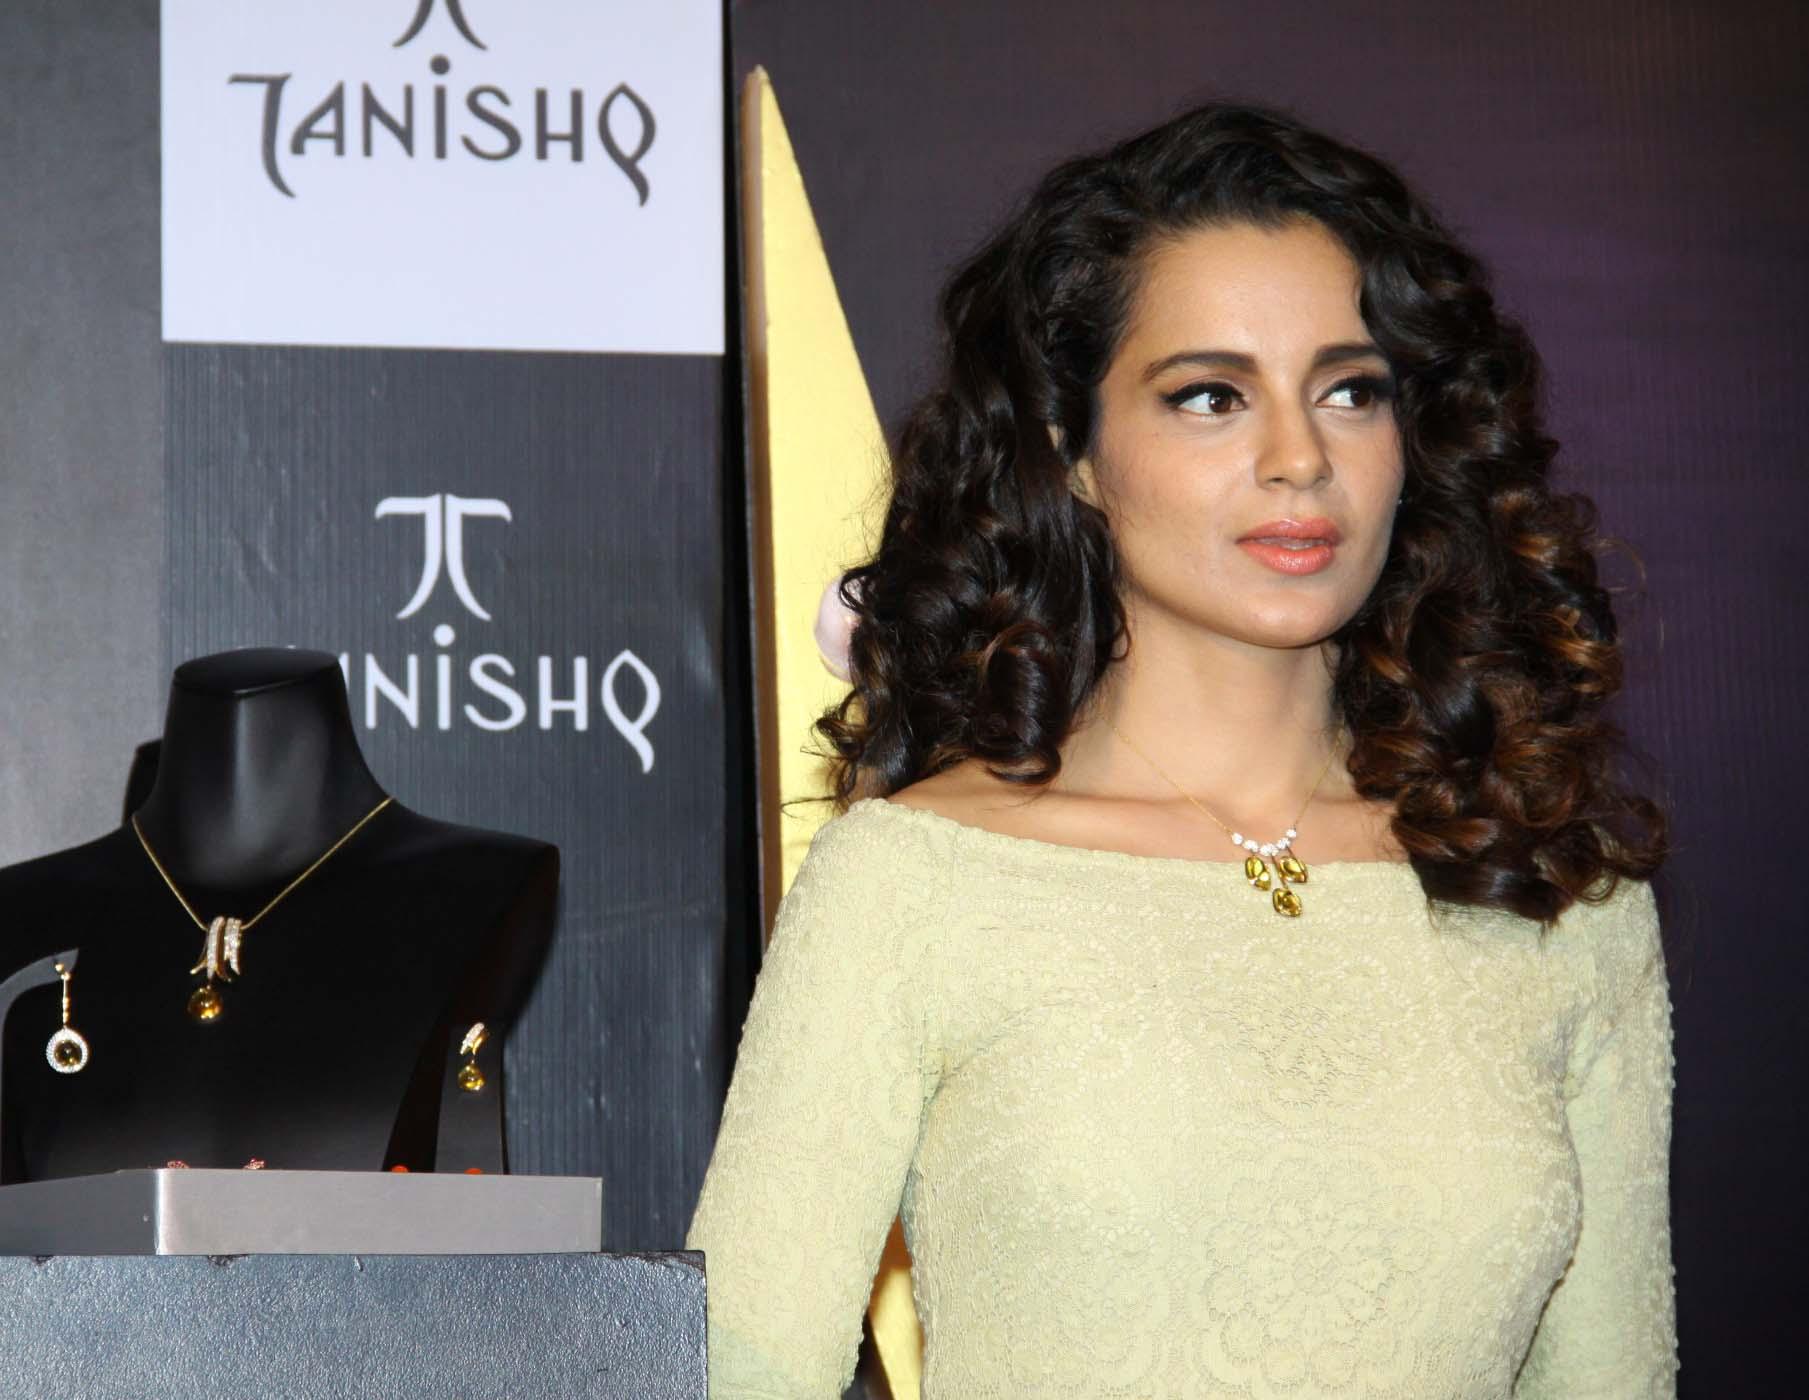 Tanishq IVA 2 Jewellery Collection Launch